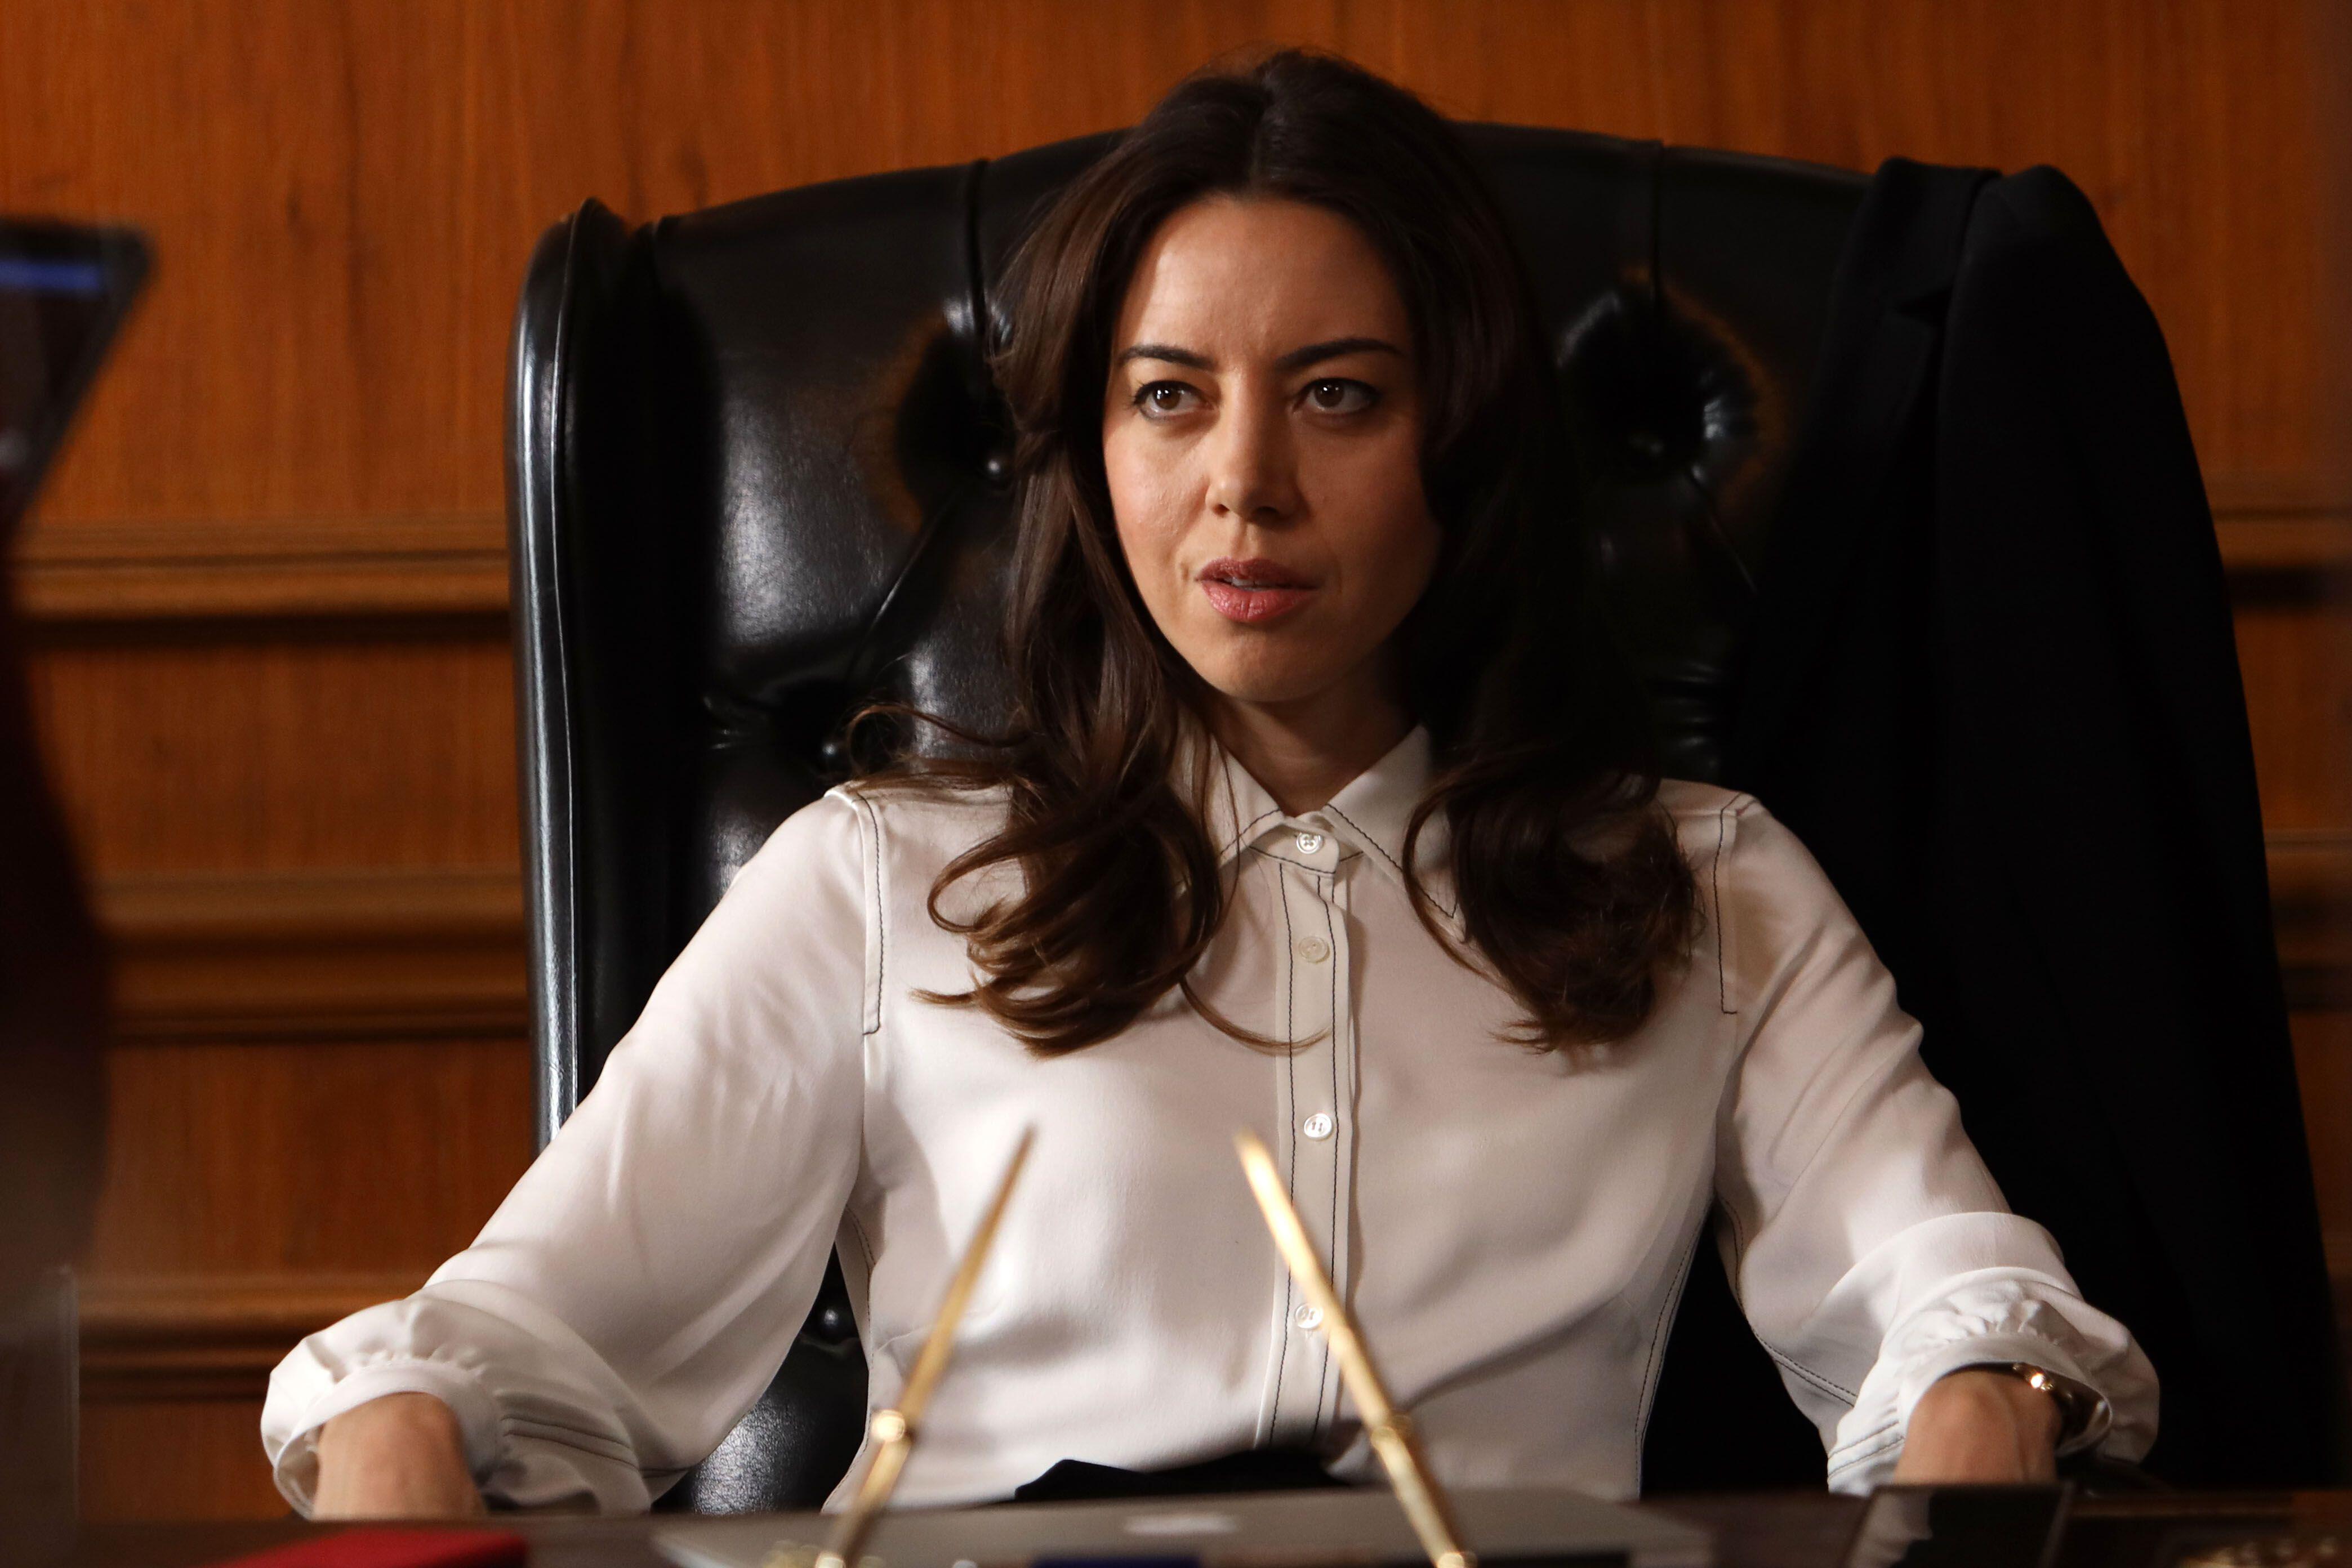 Parks and Rec's Aubrey Plaza reveals she suffered a stroke at 20 years old